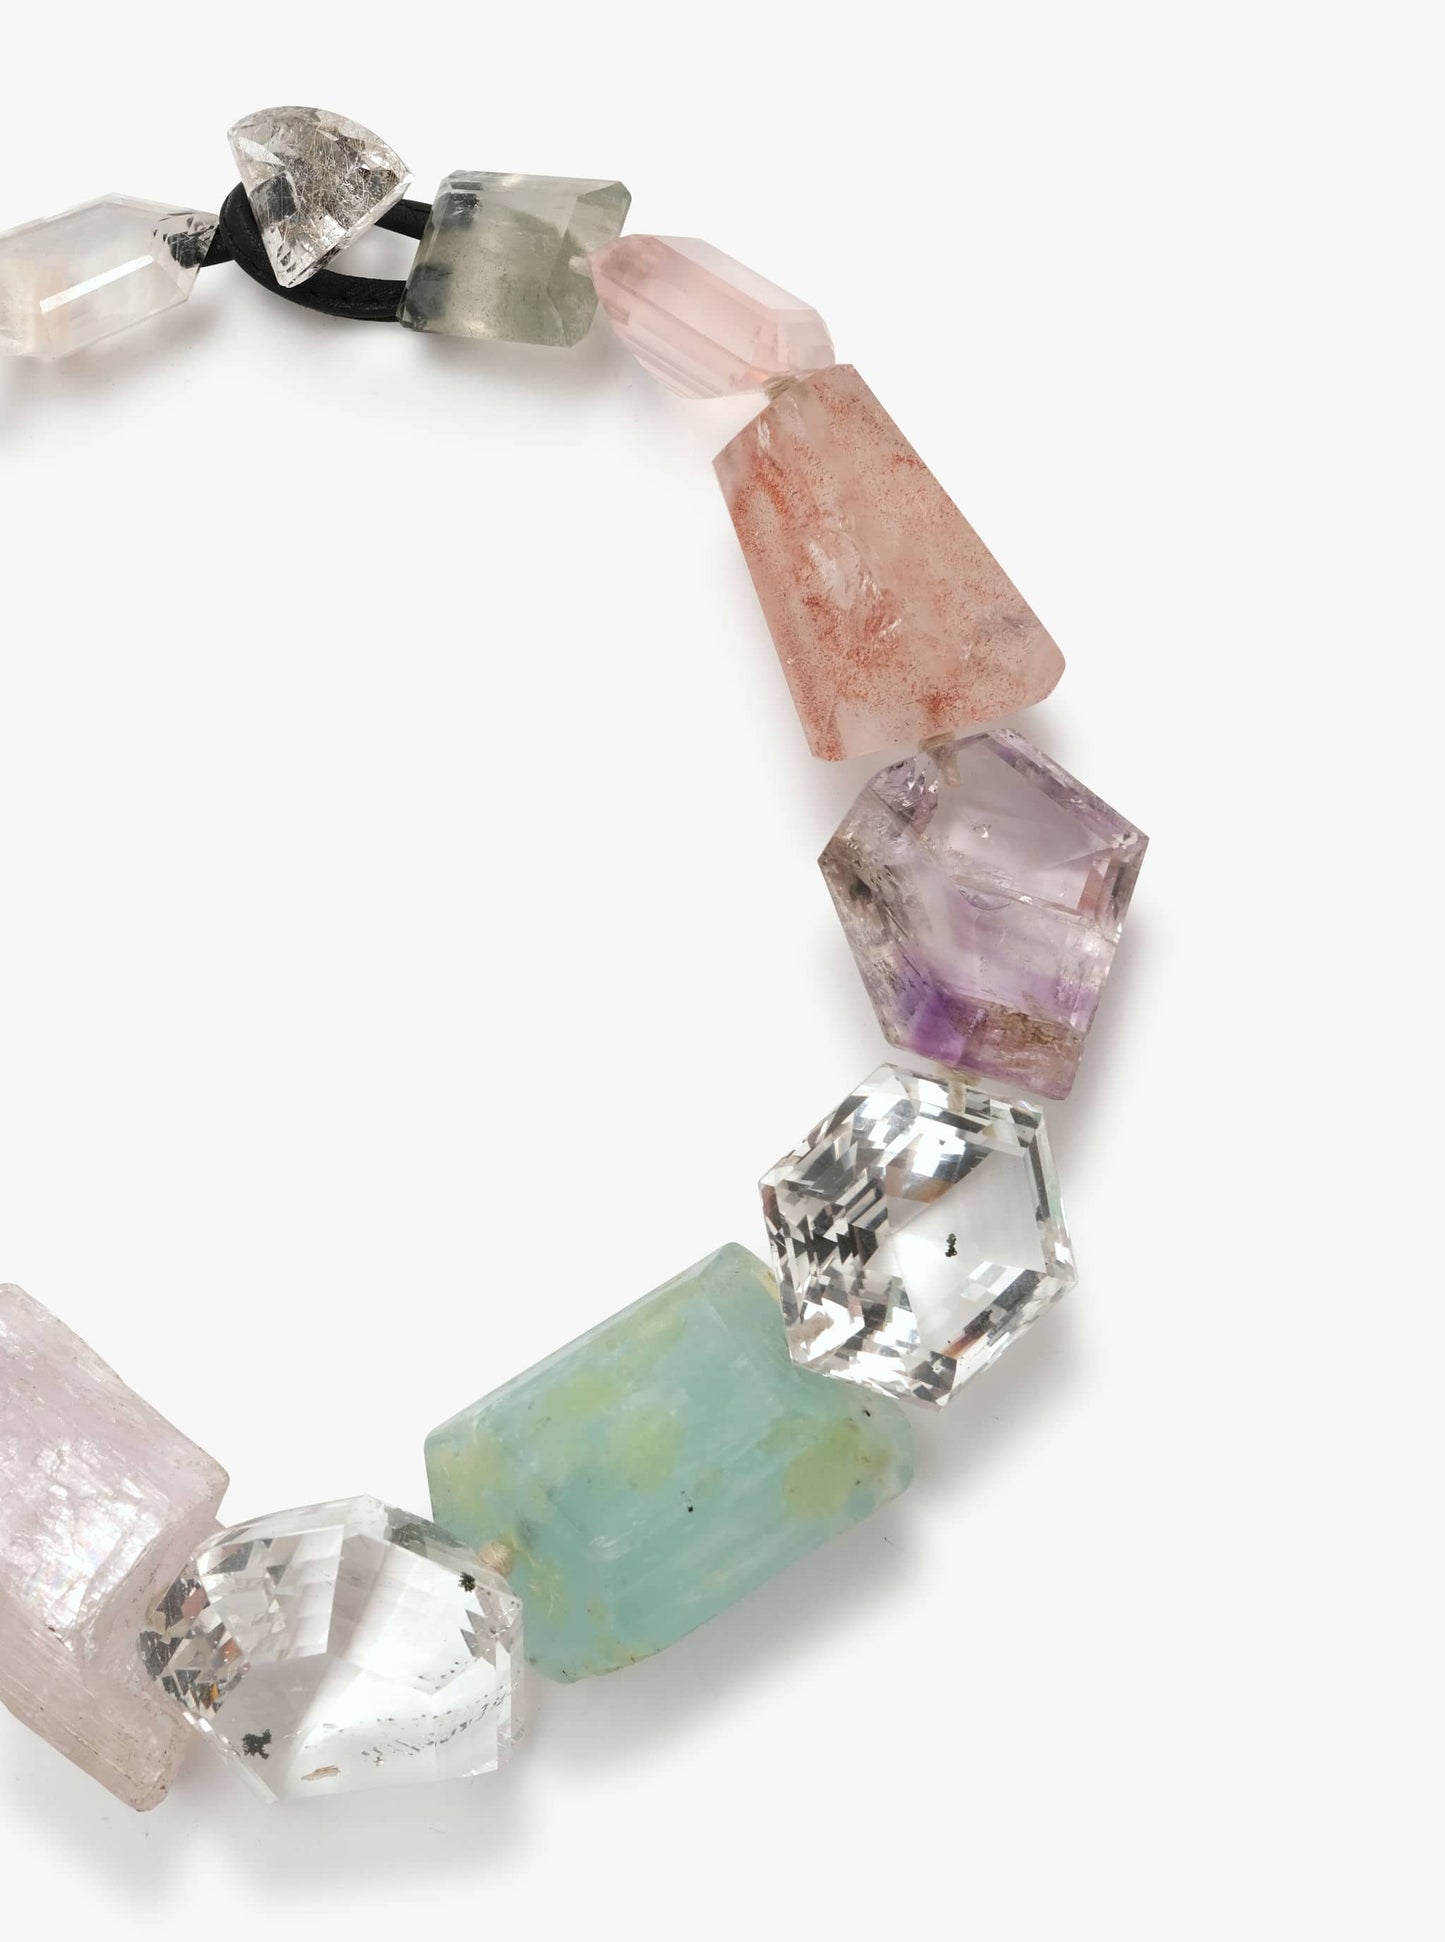 50th anniversary necklace: mixed gemstones